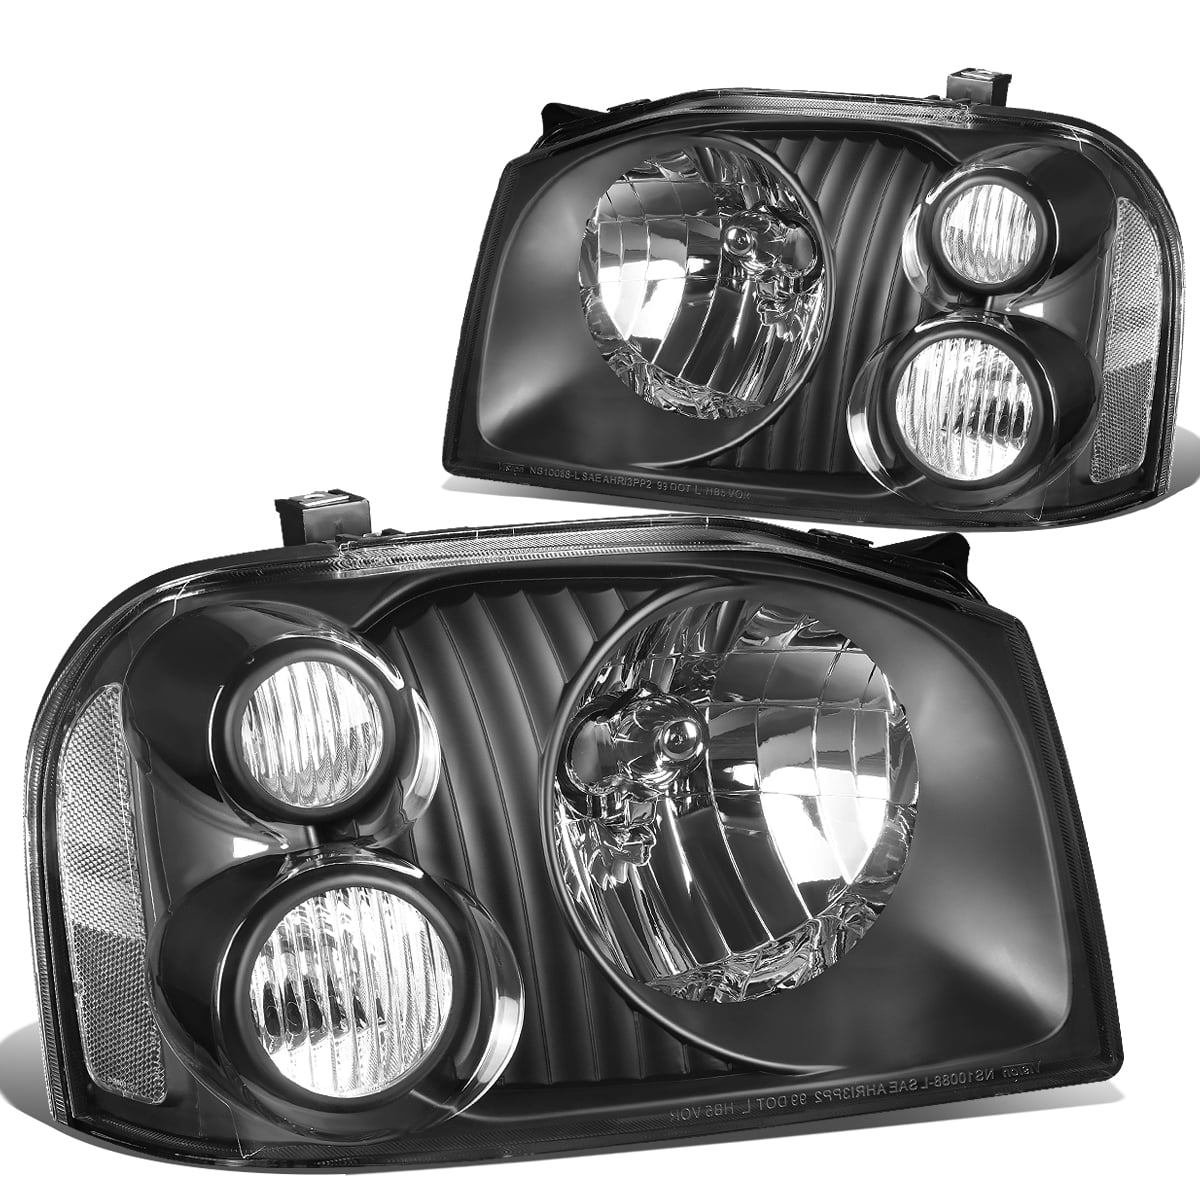 DNA Motoring HL-OH-074-BK-CL1 Pair of Headlight For 01-04 Nissan Frontier 